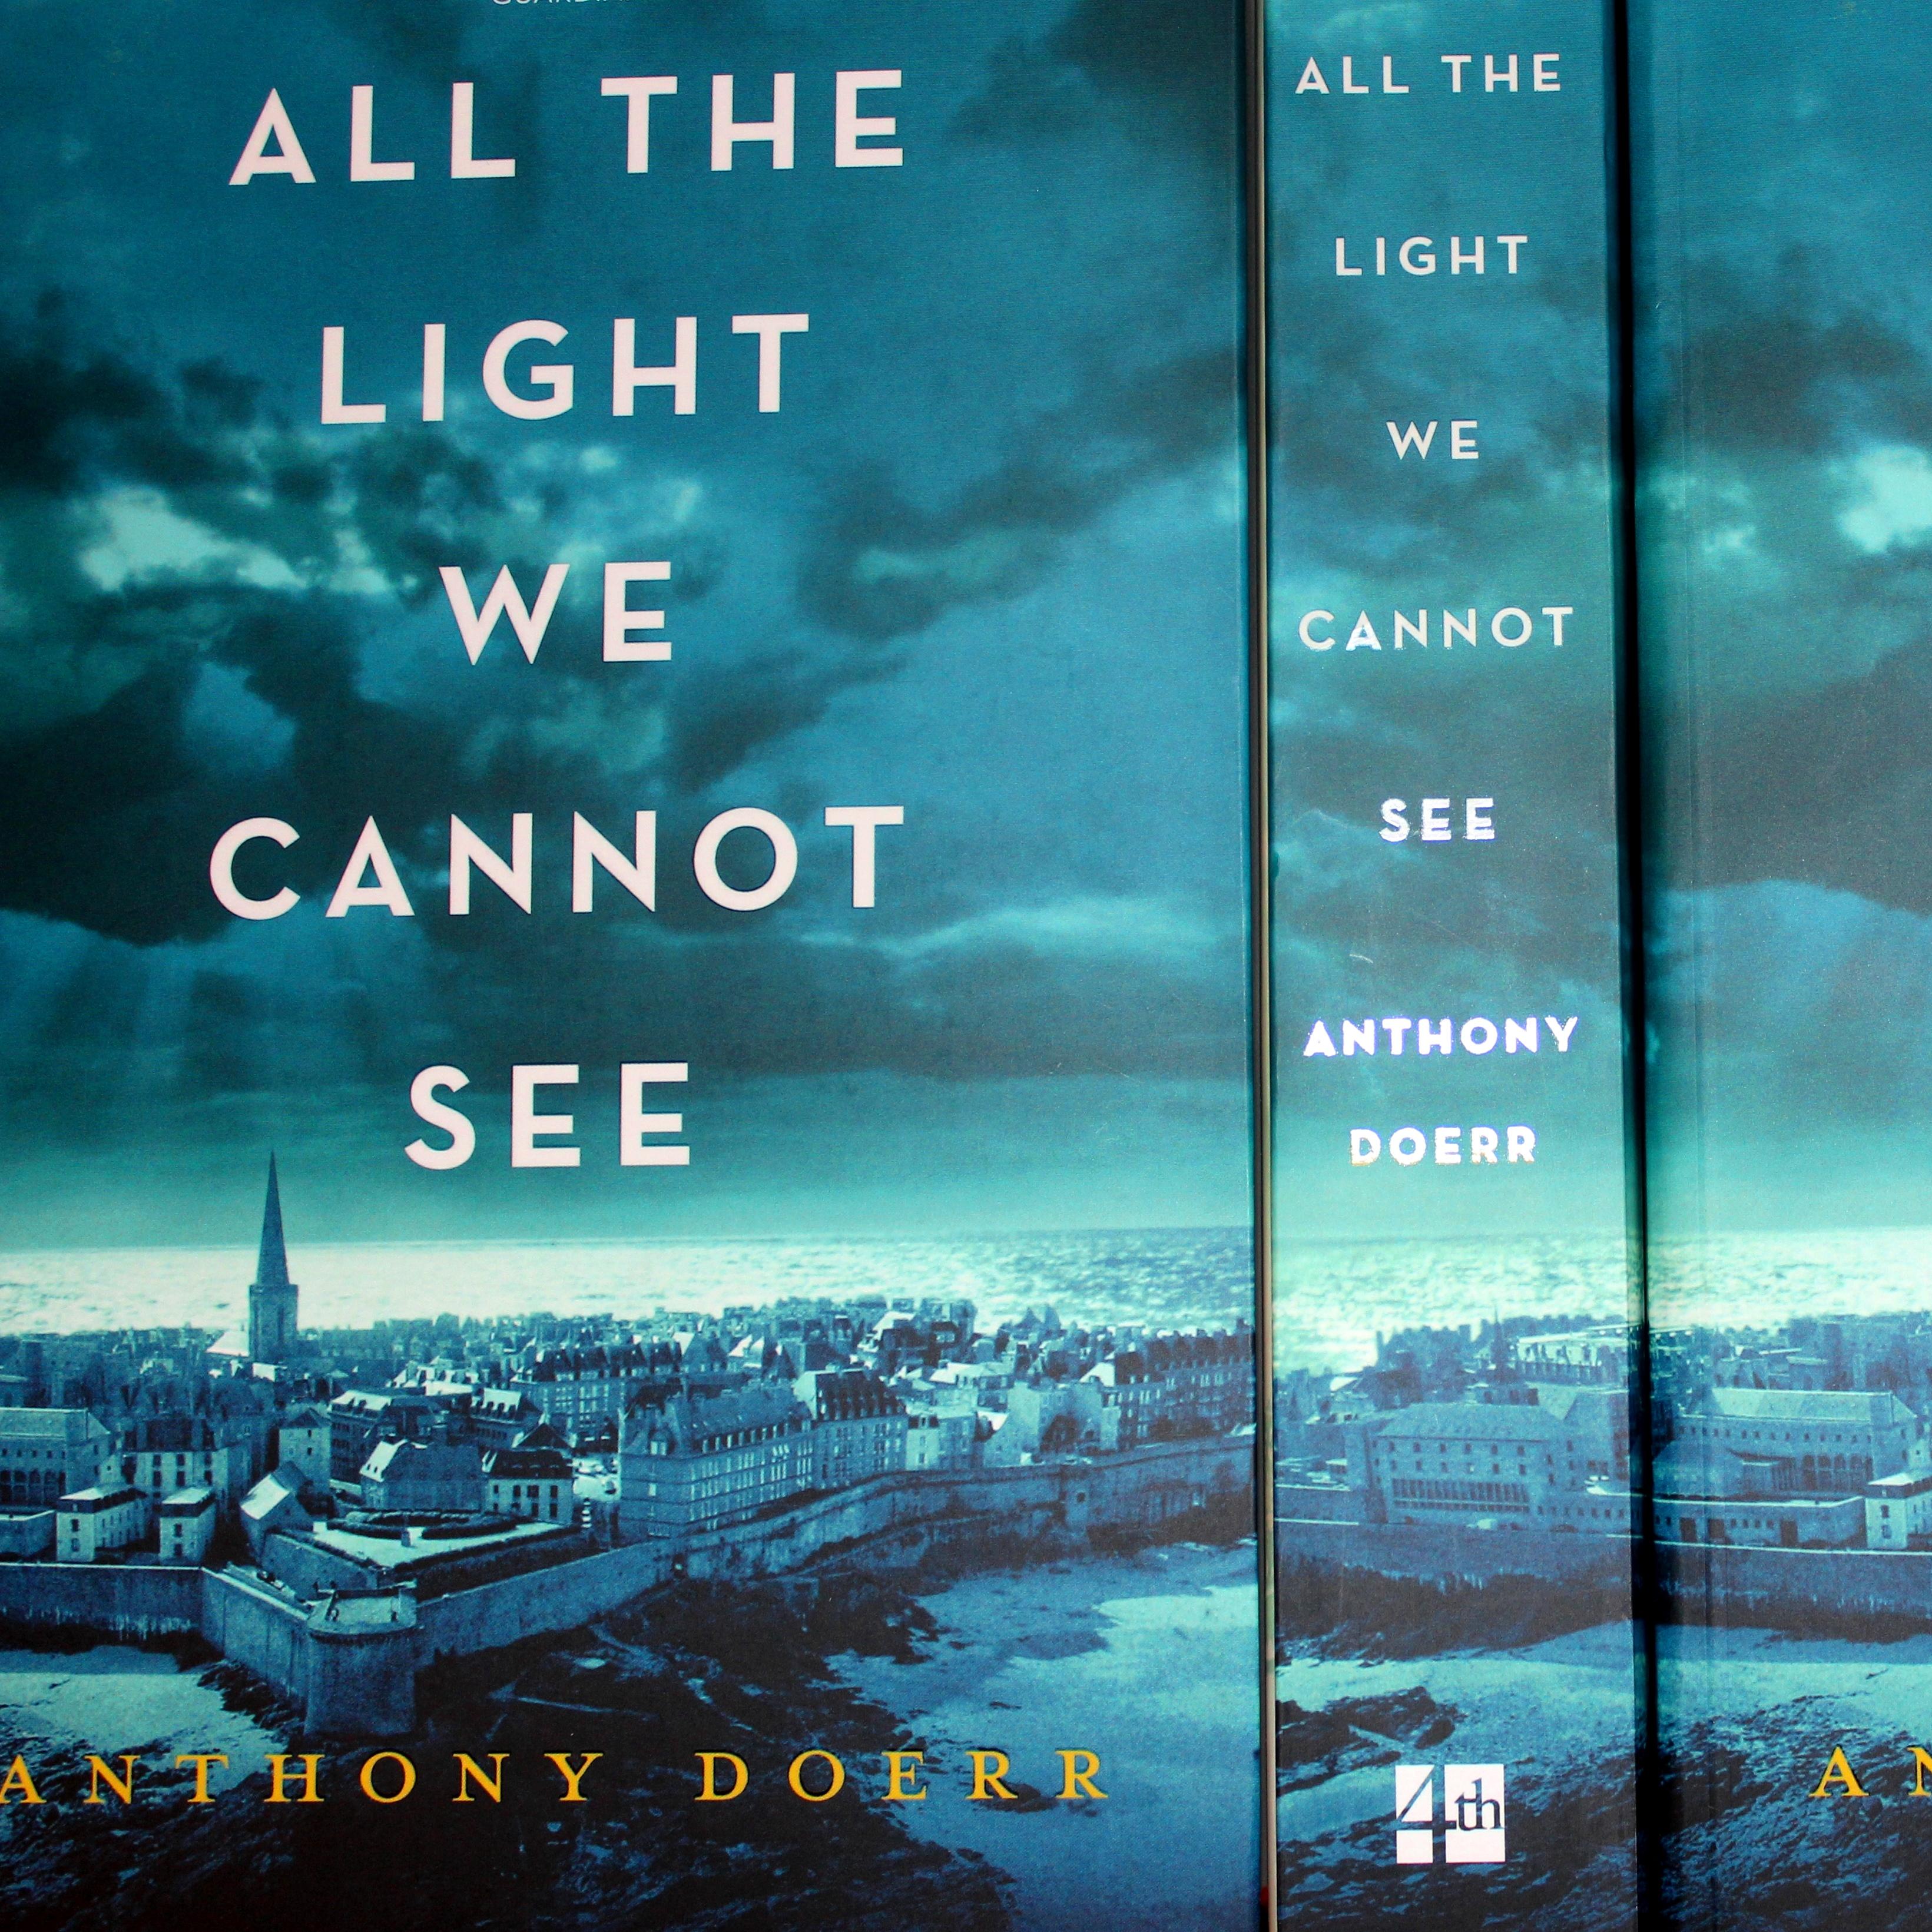 All the light we cannot see essay topics